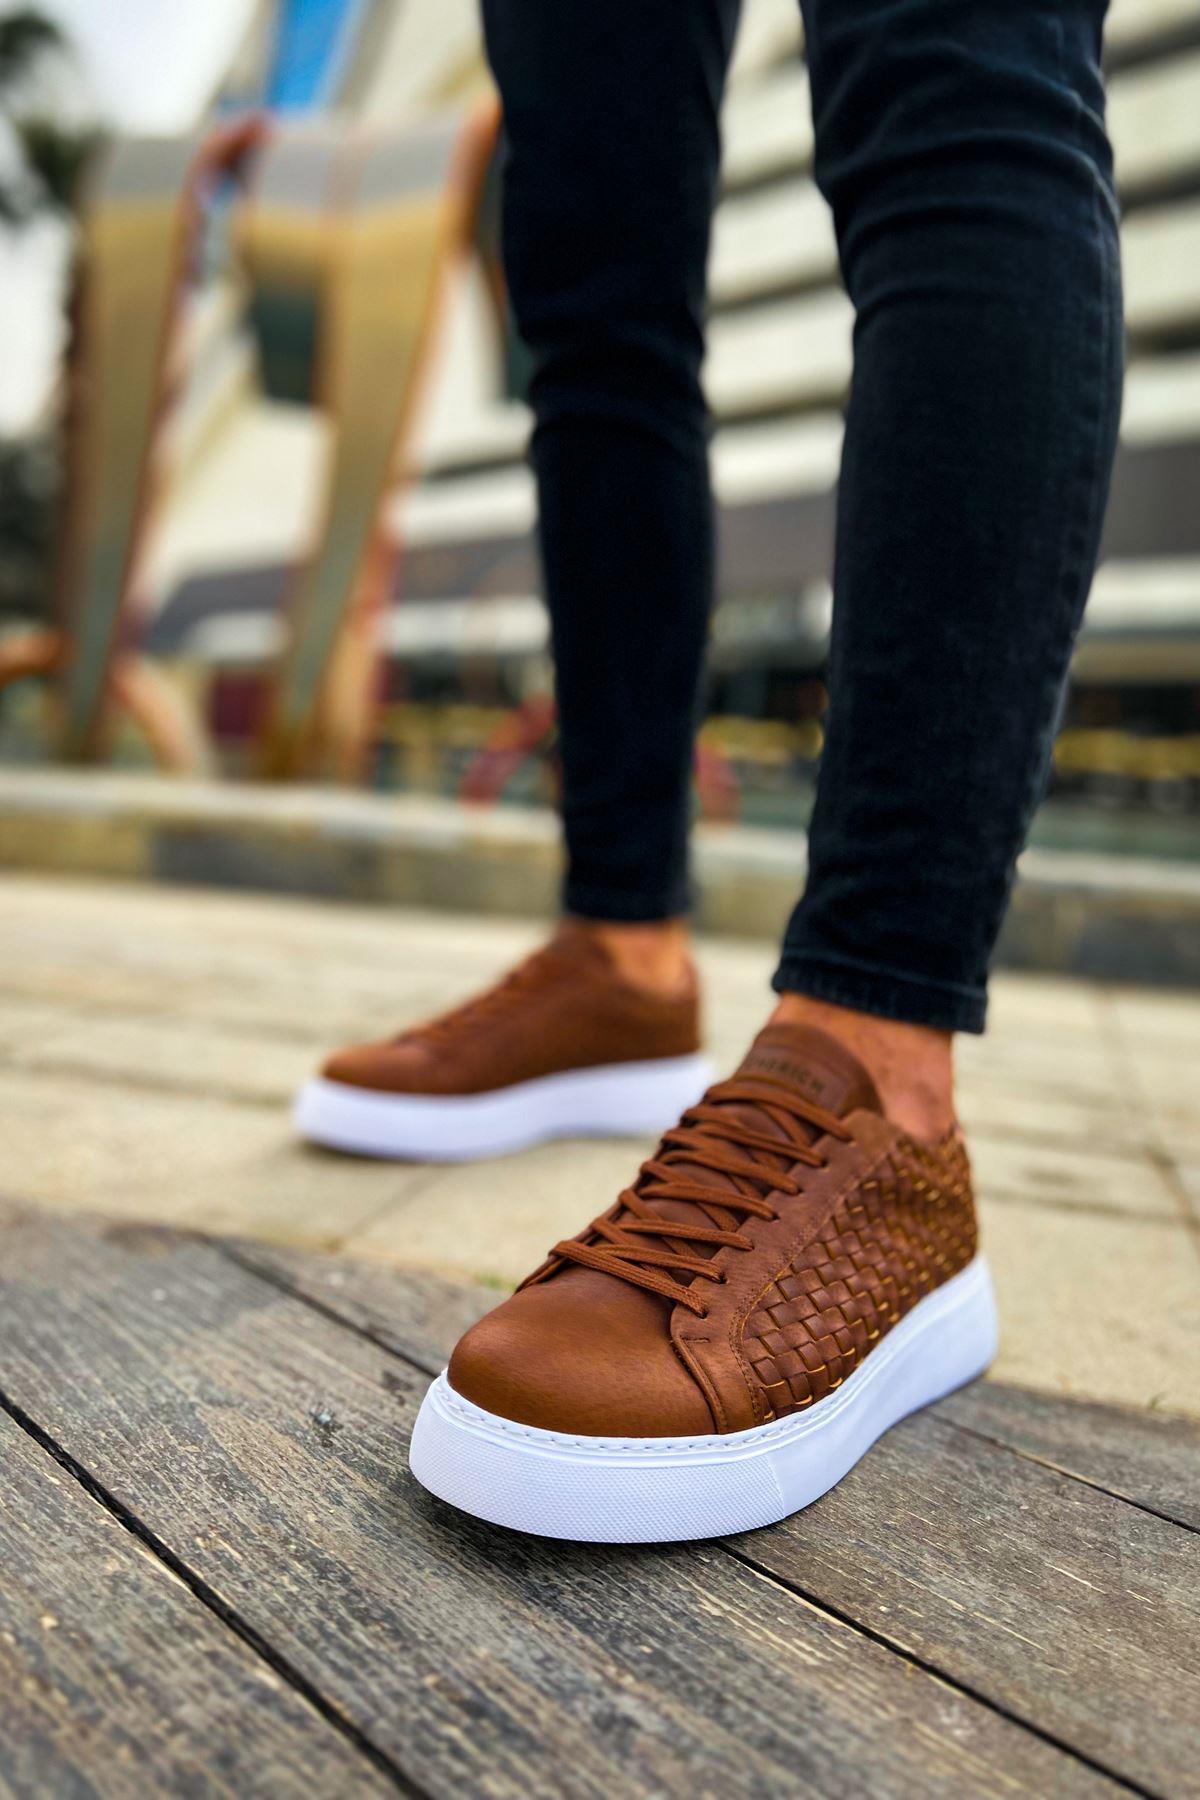 Why You Should Have Dressy Sneakers #brown #sneakers #outfit #men #fashion  #styles #brownsne… | Sneakers outfit men, Mens casual outfits, Men fashion  casual outfits